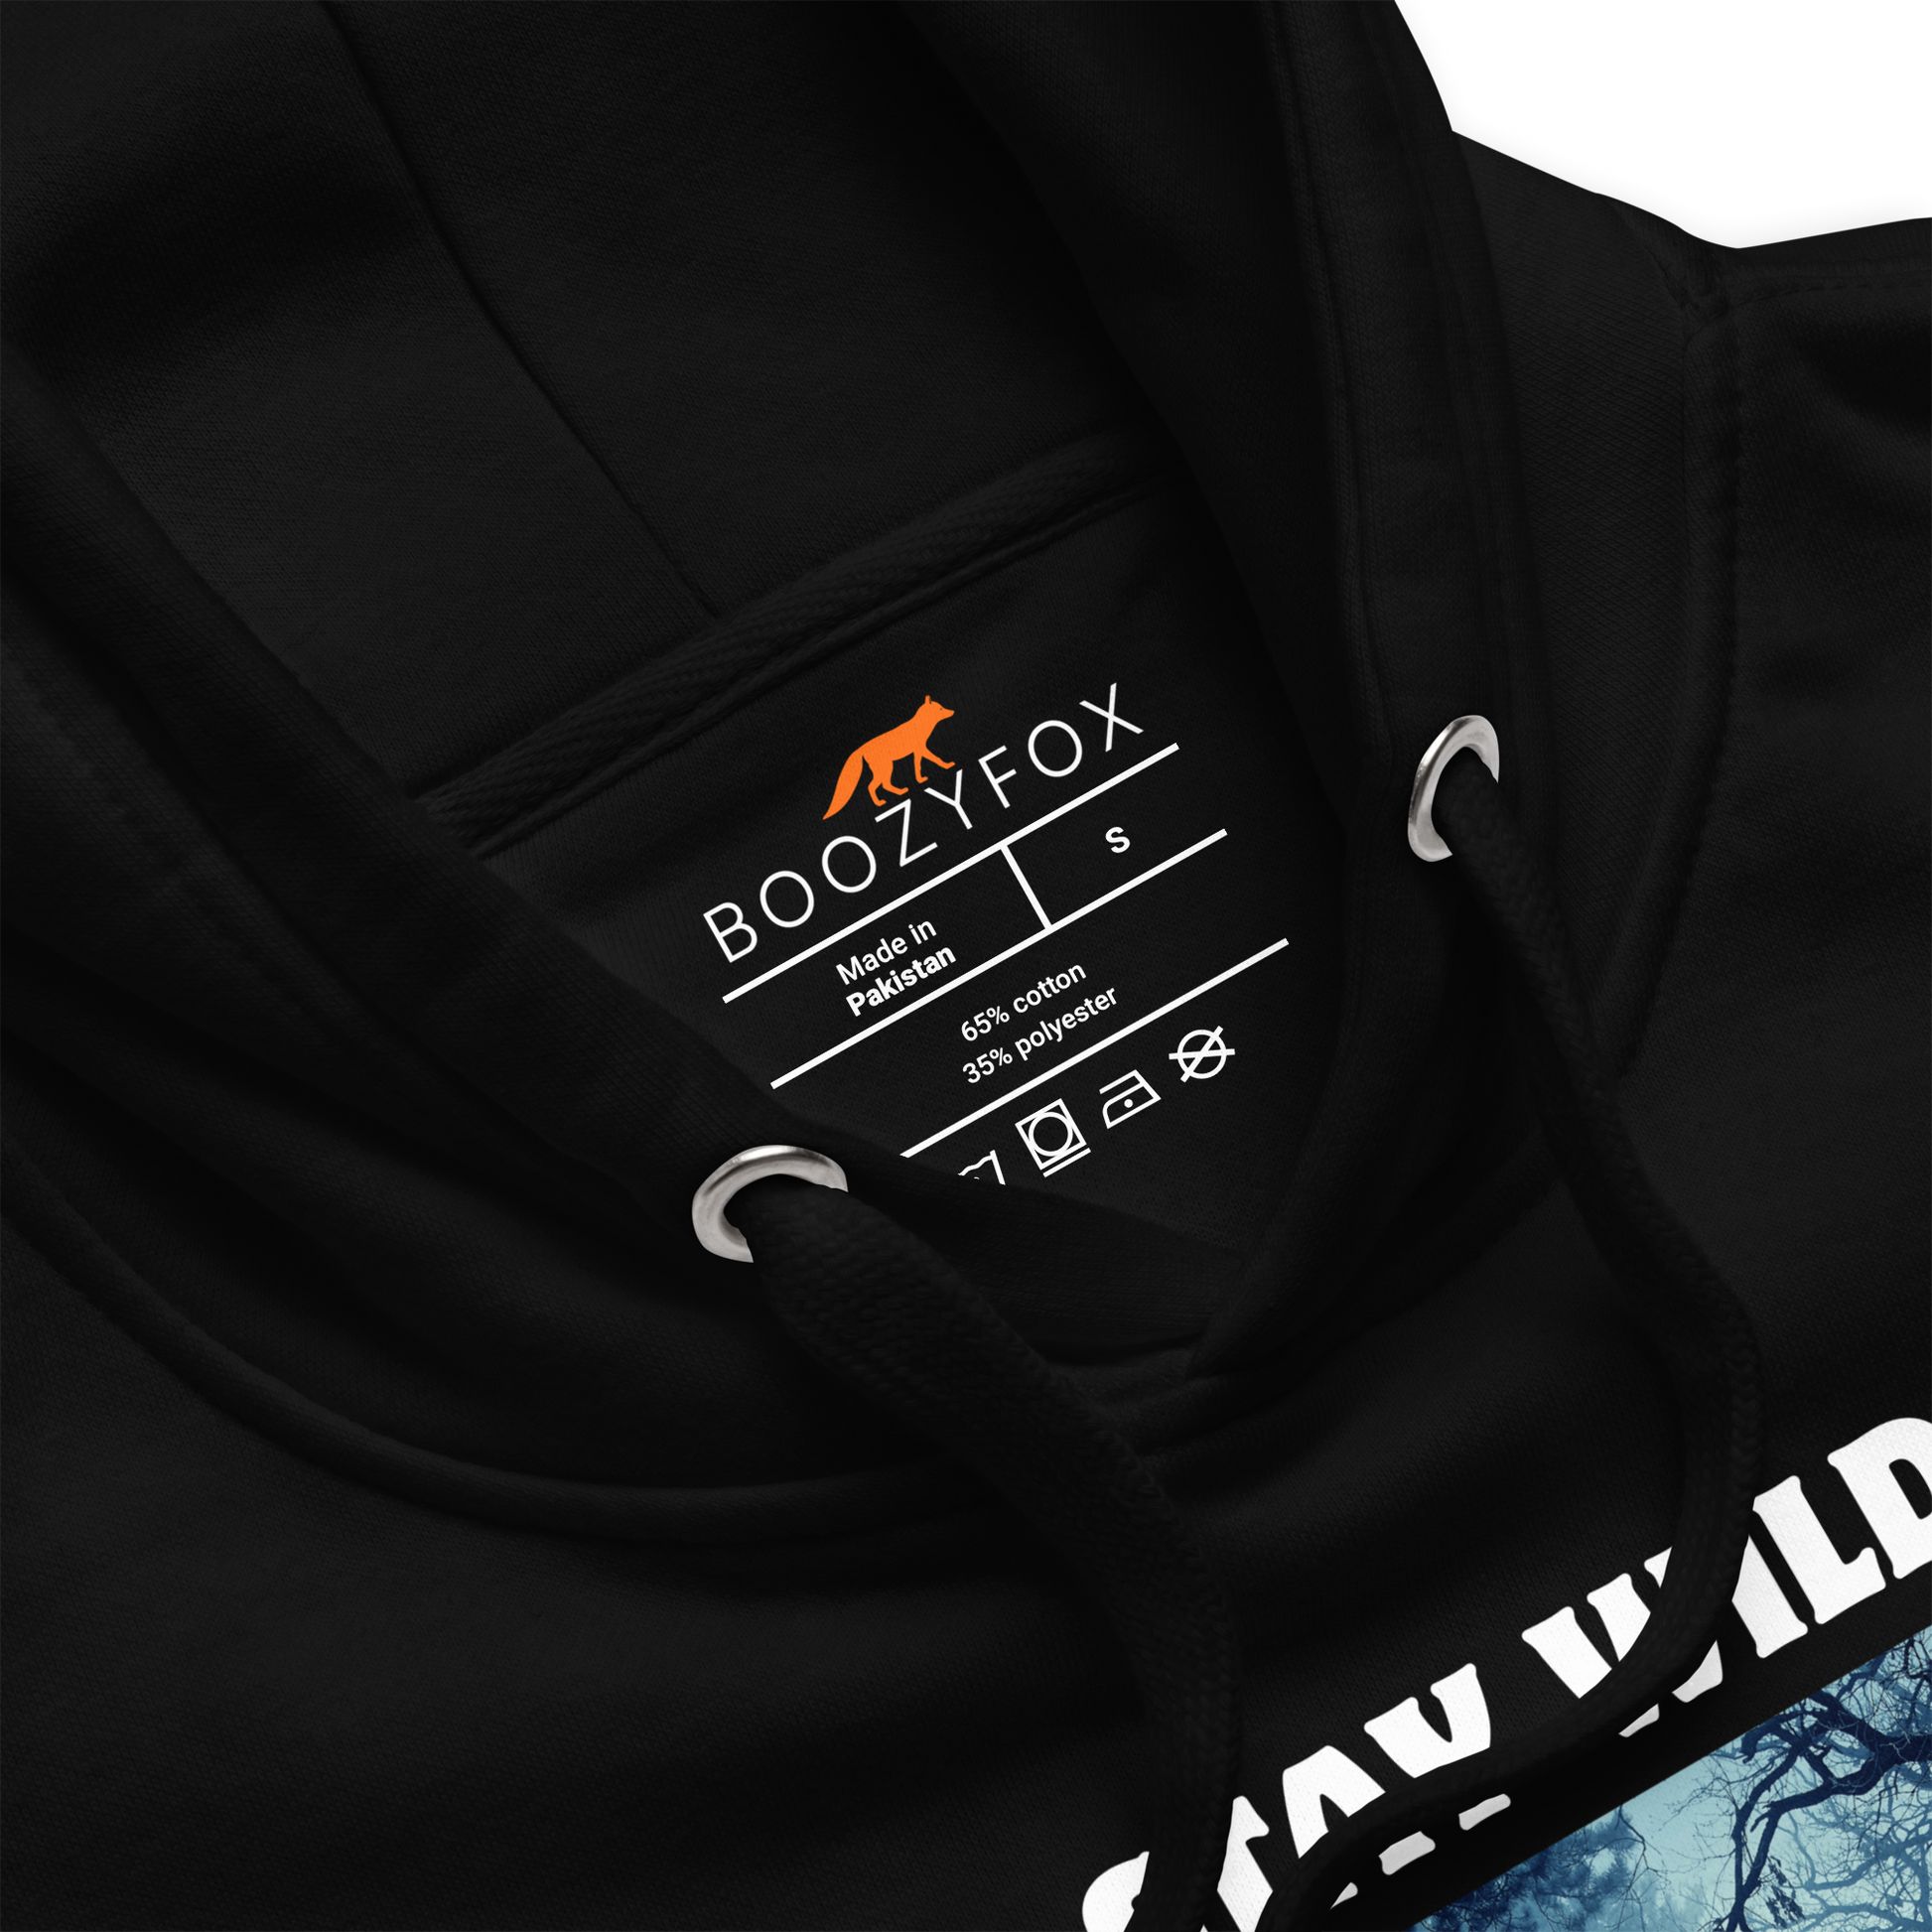 Product details of a Black Premium Bear Hoodie featuring a Stay Wild graphic on the chest - Cool Graphic Bear Hoodies - Boozy Fox